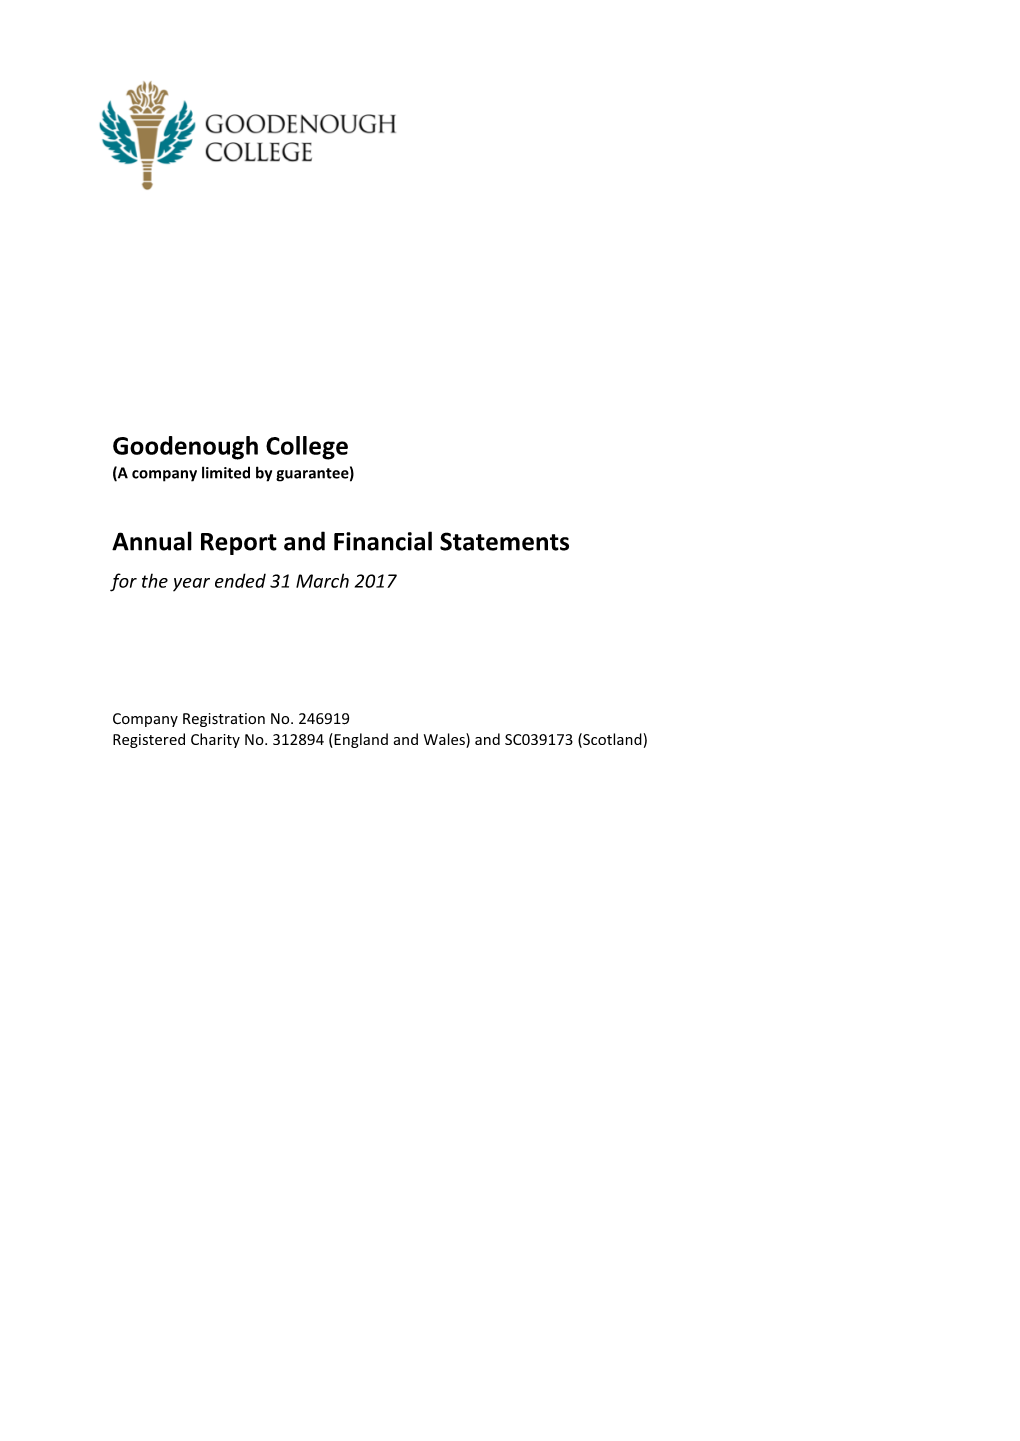 Goodenough College Annual Report and Financial Statements